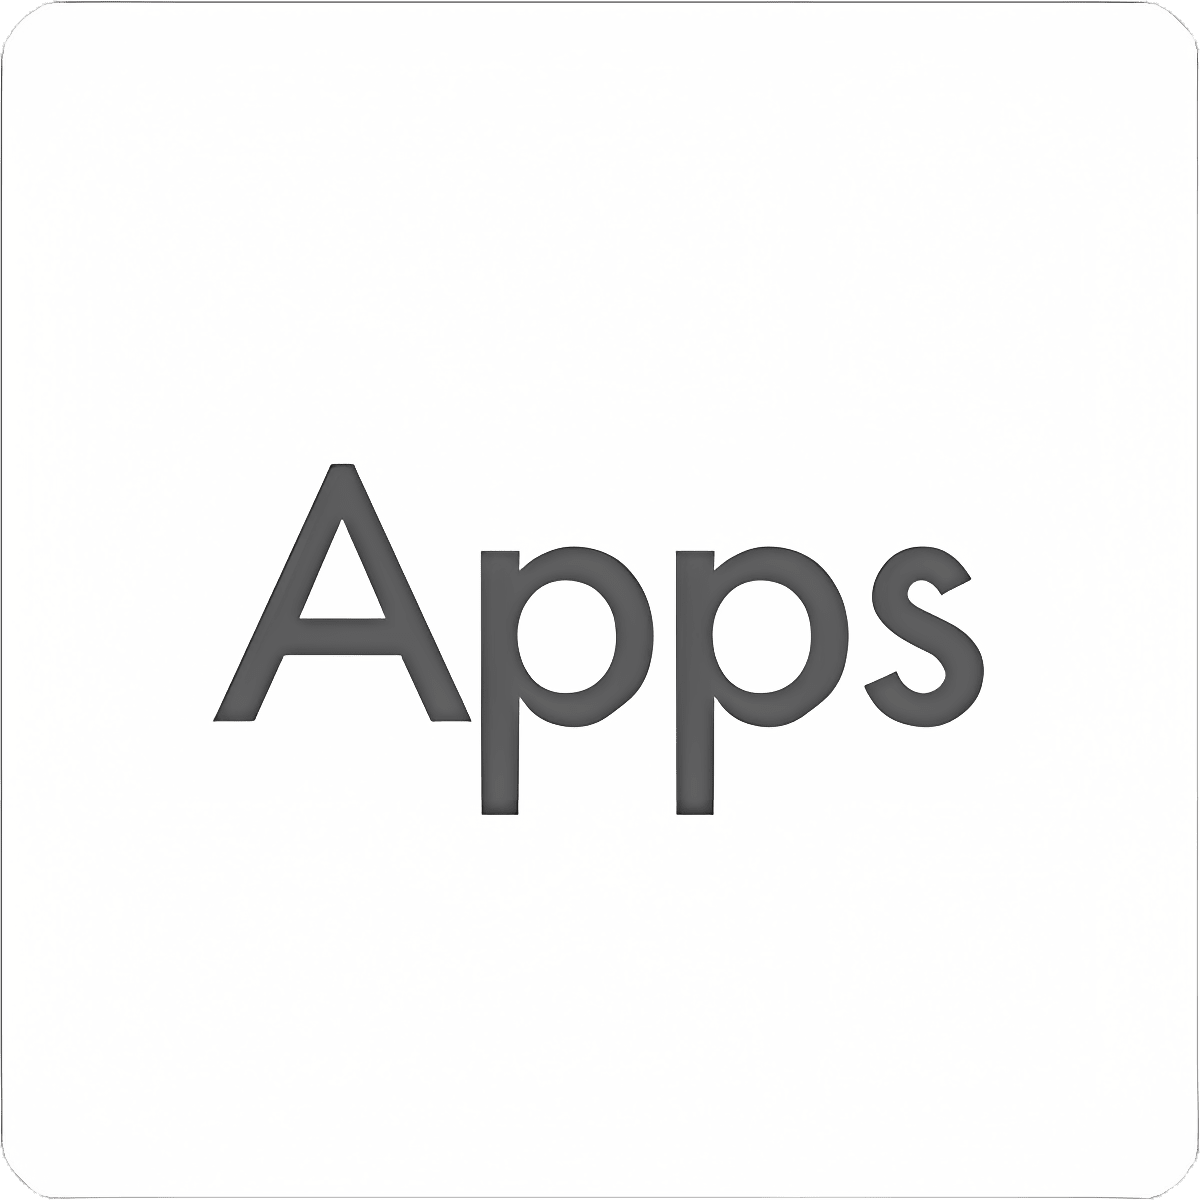 download apps from play store without installing